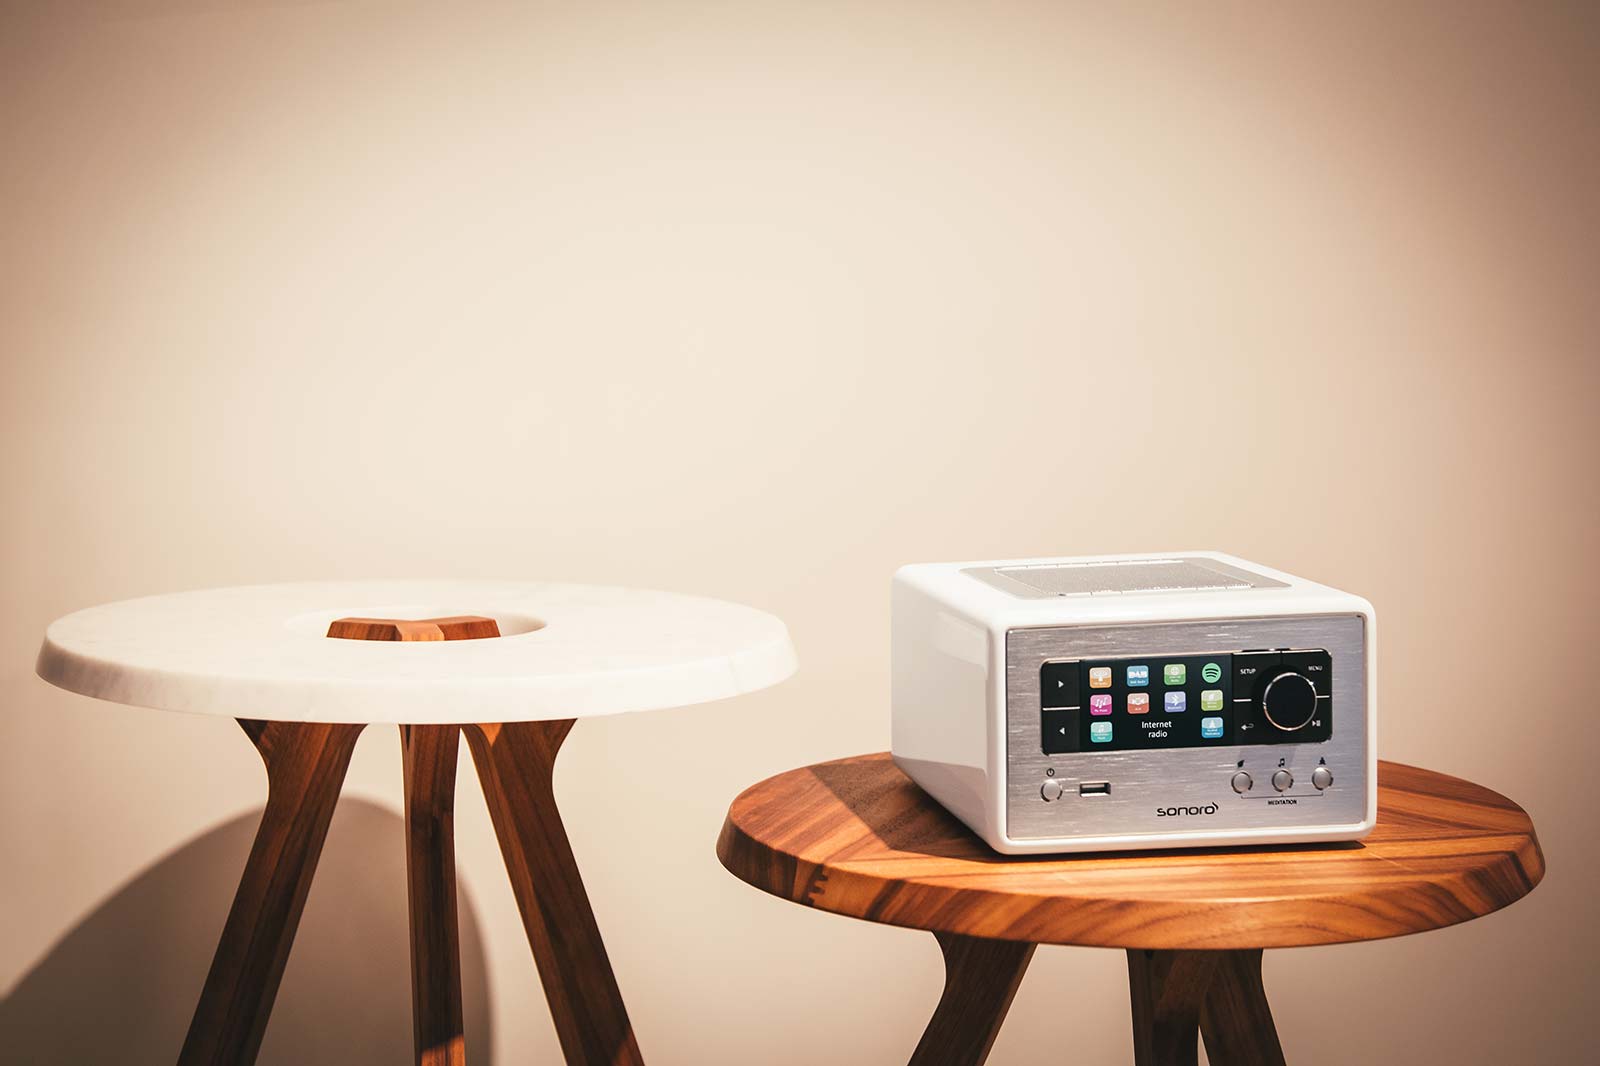 SONORO RELAX DAB+ RADIO WITH WIFI STREAMING SONORO